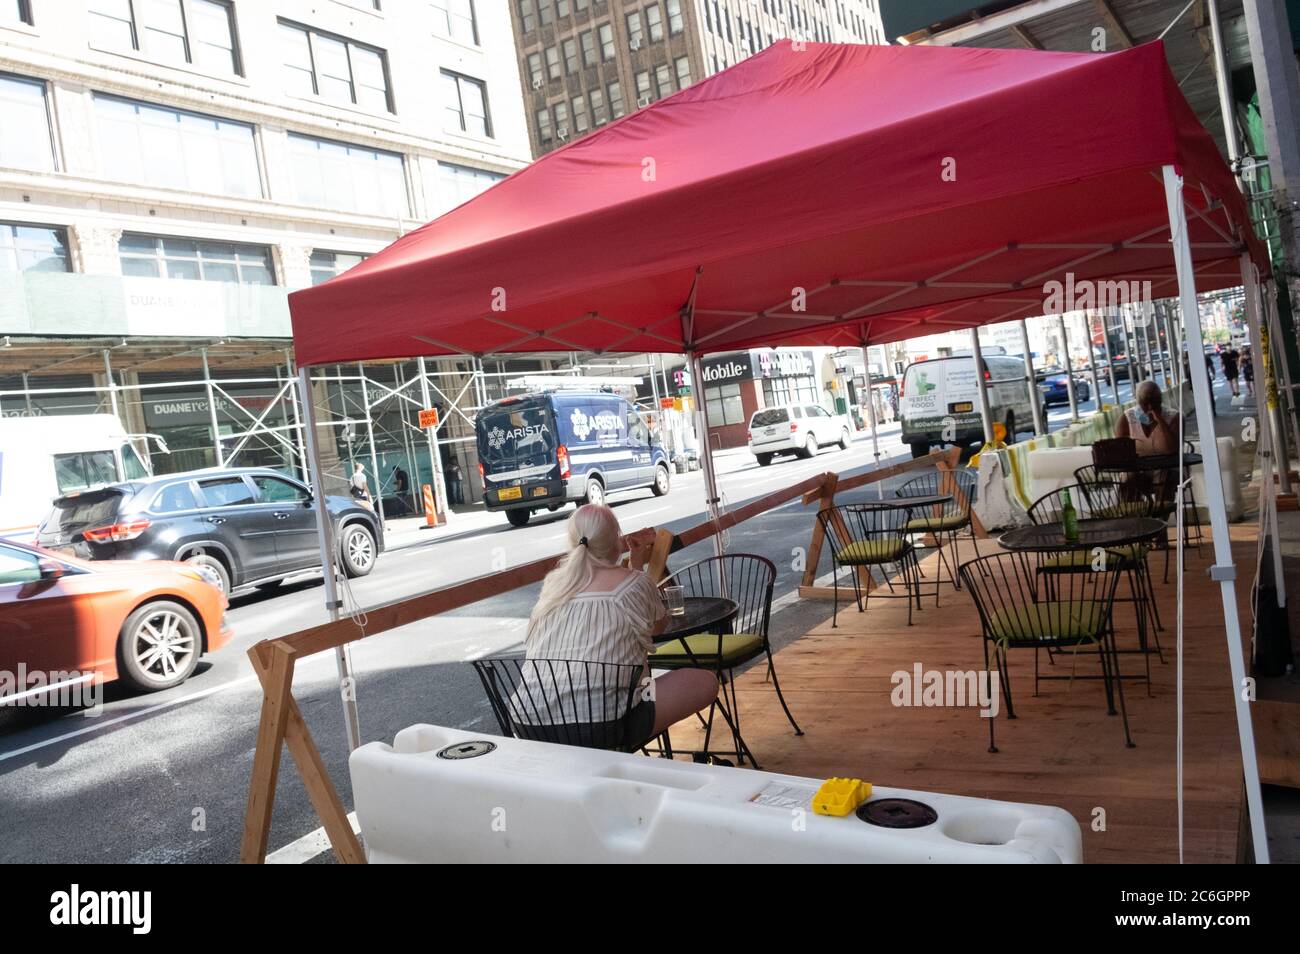 New York, United States. 08th July, 2020. A woman sits in an outdoor dinning setup of a Manhattan restaurant as the city enters phase 3 of reopening amid the coronavirus pandemic.As New York City enters phase 3 of reopening retail stores for indoor shopping, restaurants have been postponed for indoor dinning. Meanwhile Black Lives Matter protests continue in the city as the Mayor along with a group of people painted a large Black Lives Matter mural in front of Trump Tower on 5th Ave. Credit: SOPA Images Limited/Alamy Live News Stock Photo